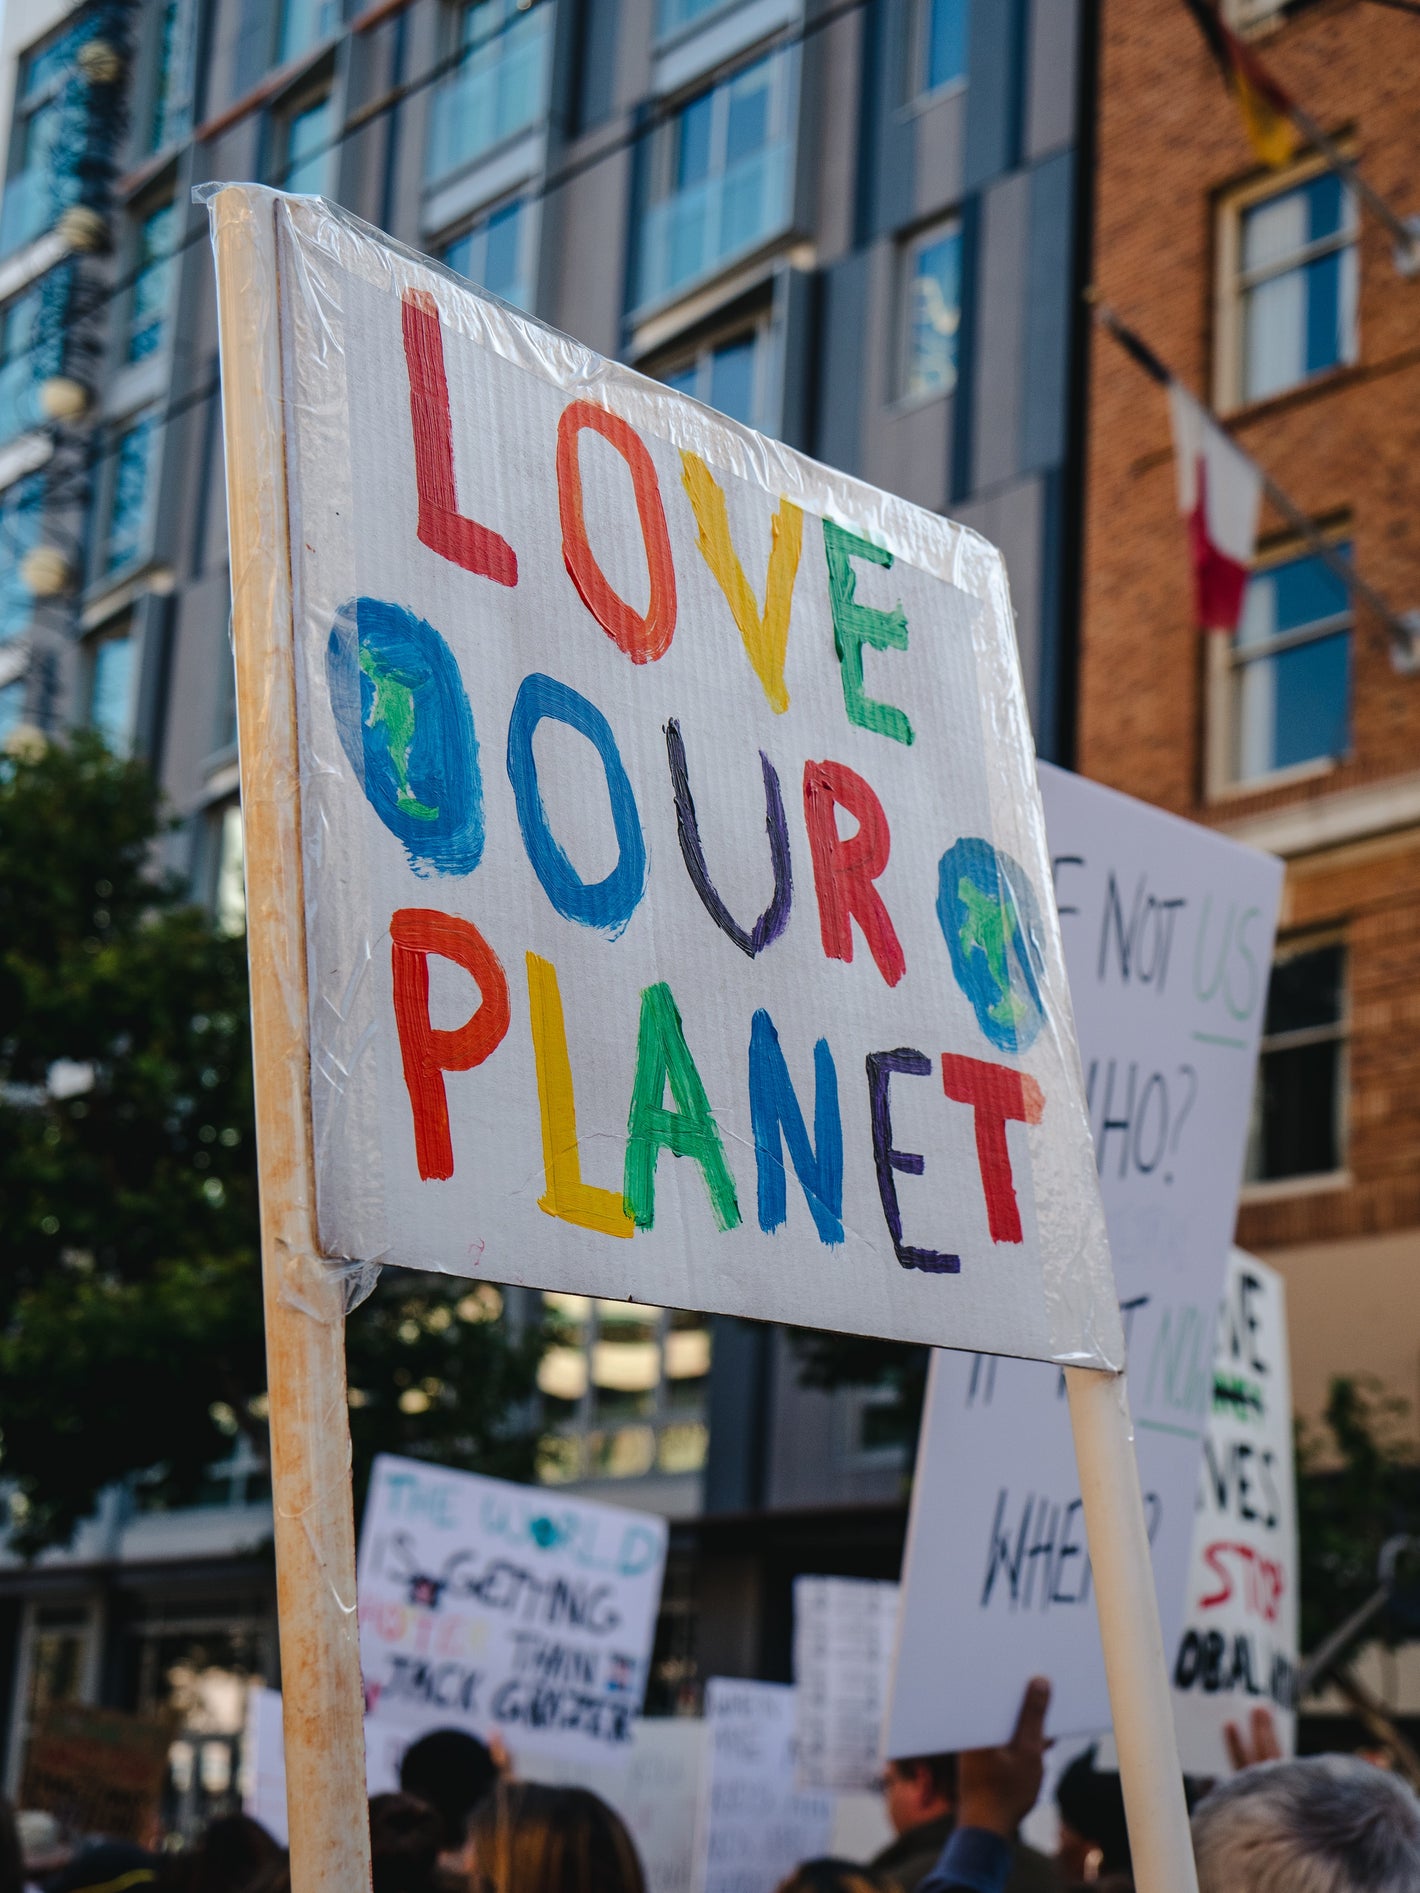 An environmental protest held in a city, with protesters holding up a large sign which reads "LOVE OUR PLANET".  